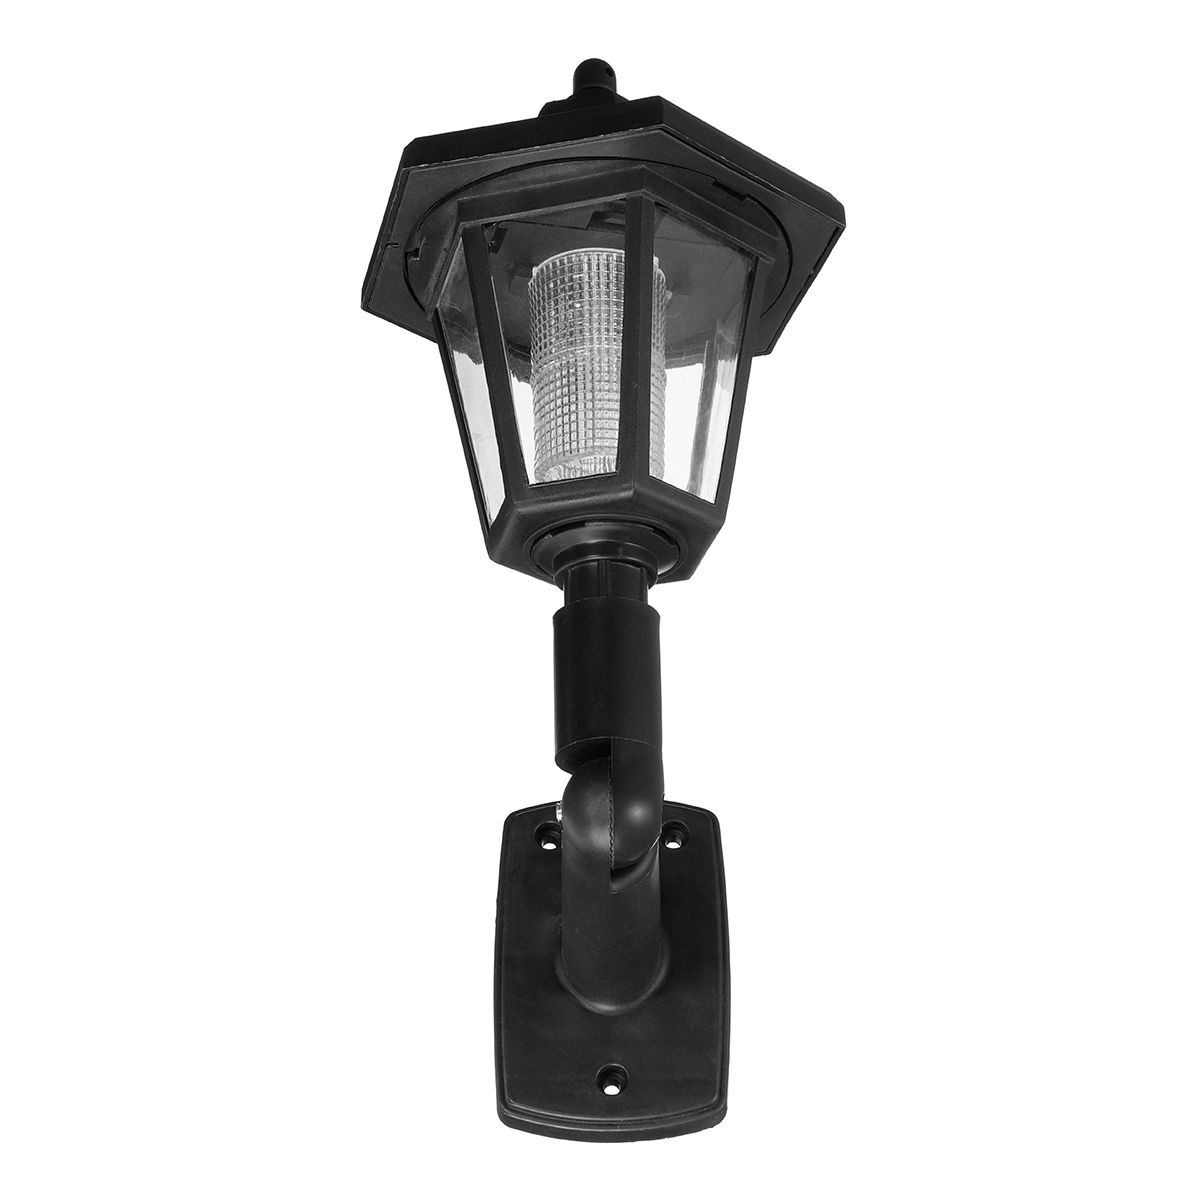 Outdoor-Garden-LED-Solar-Power-Path-Wall-Light-Lawn-Landscape-Security-Lamp-1633912